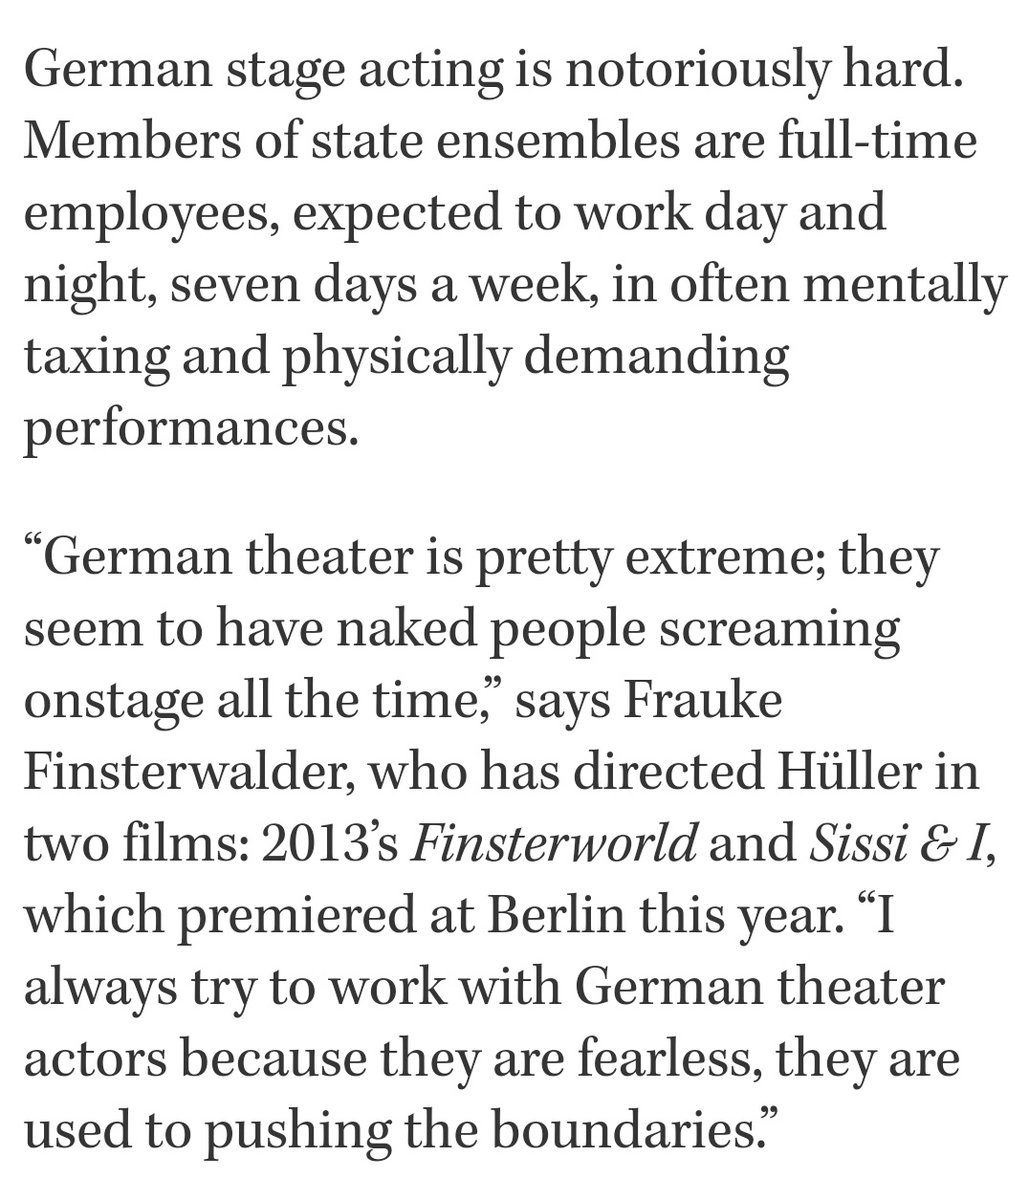 @Seath_PK @Blackswissmiss @lionesspike Again, I apologize, I recalled differently. Rehearsals are quite extreme, though, and actors are employed and work 7/7.
This, however, does not take anything away from German stage actors' discipline, or hard work. The take on film acting remains real, which isn't easy either.